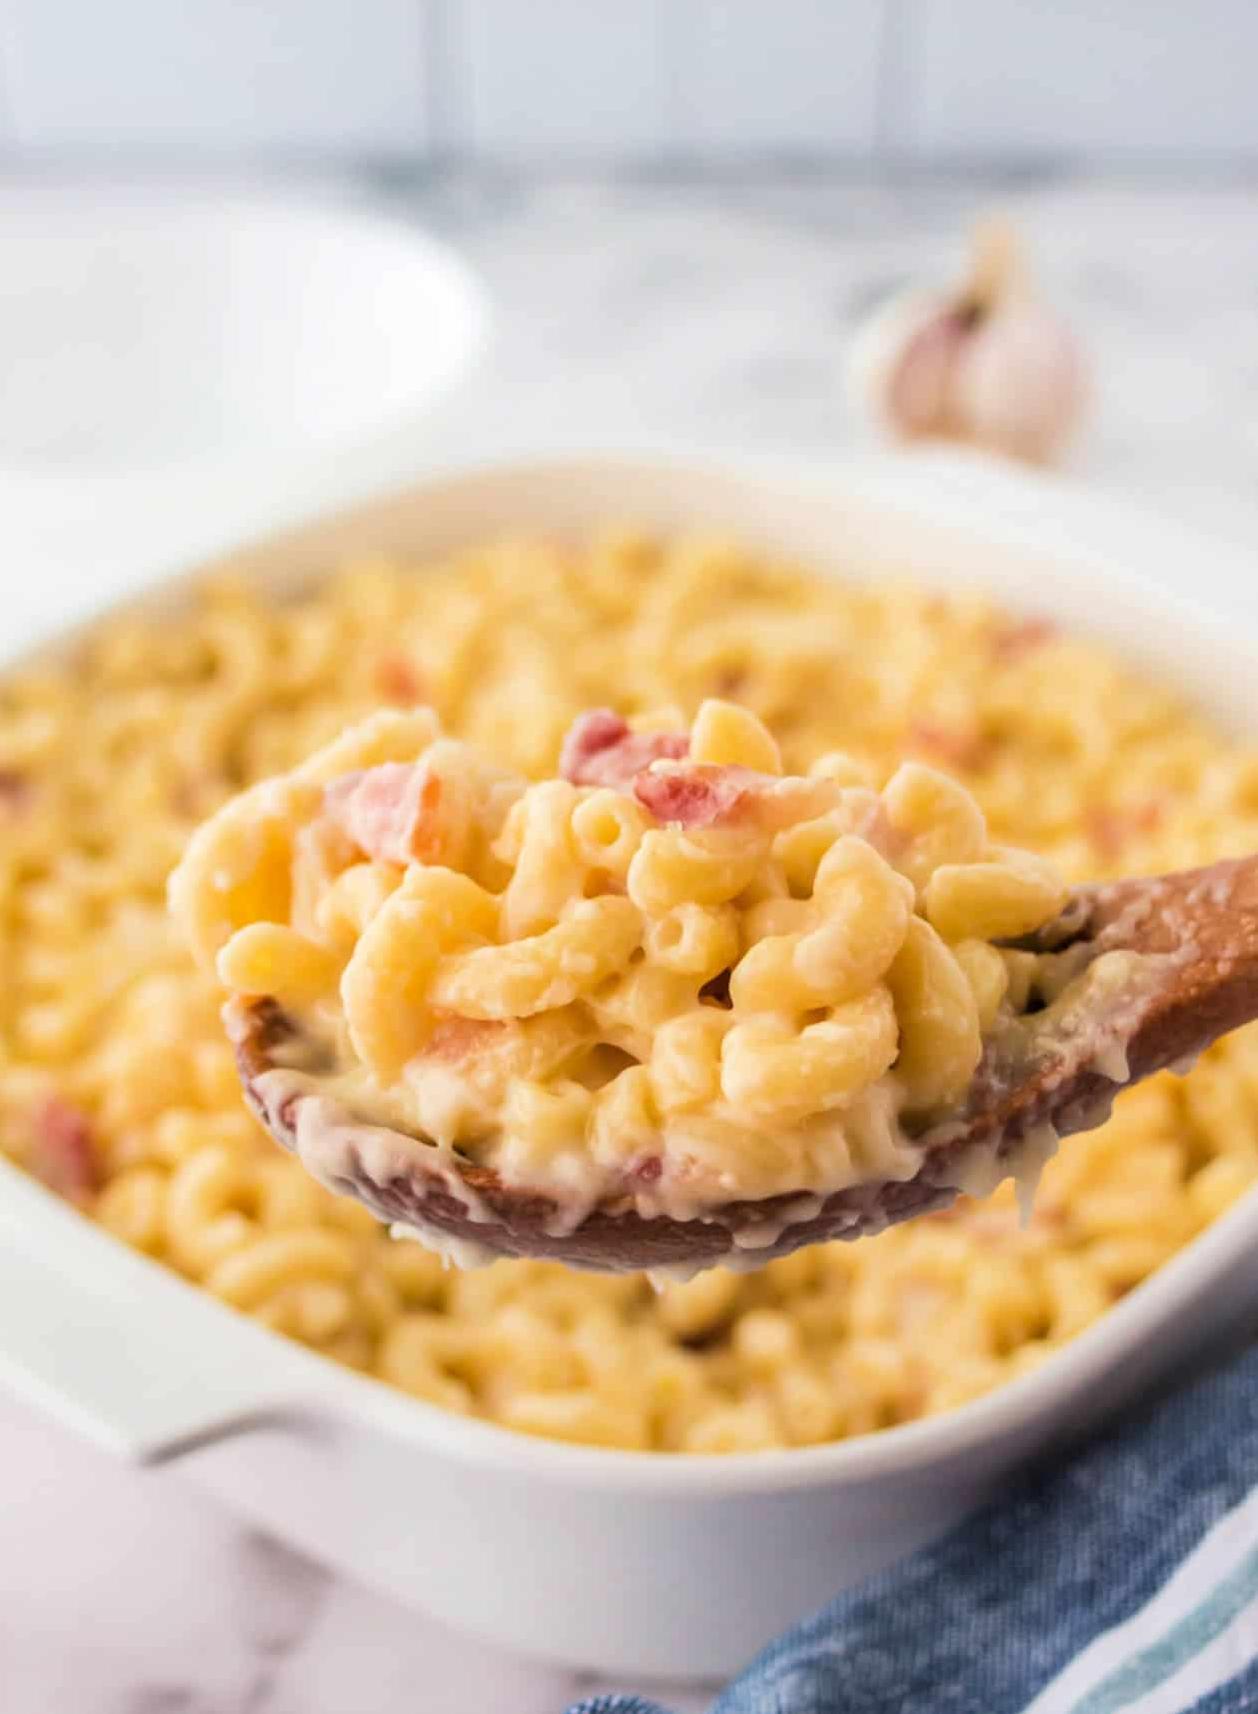  This Instant Pot Mac and Cheese is the definition of comfort food!